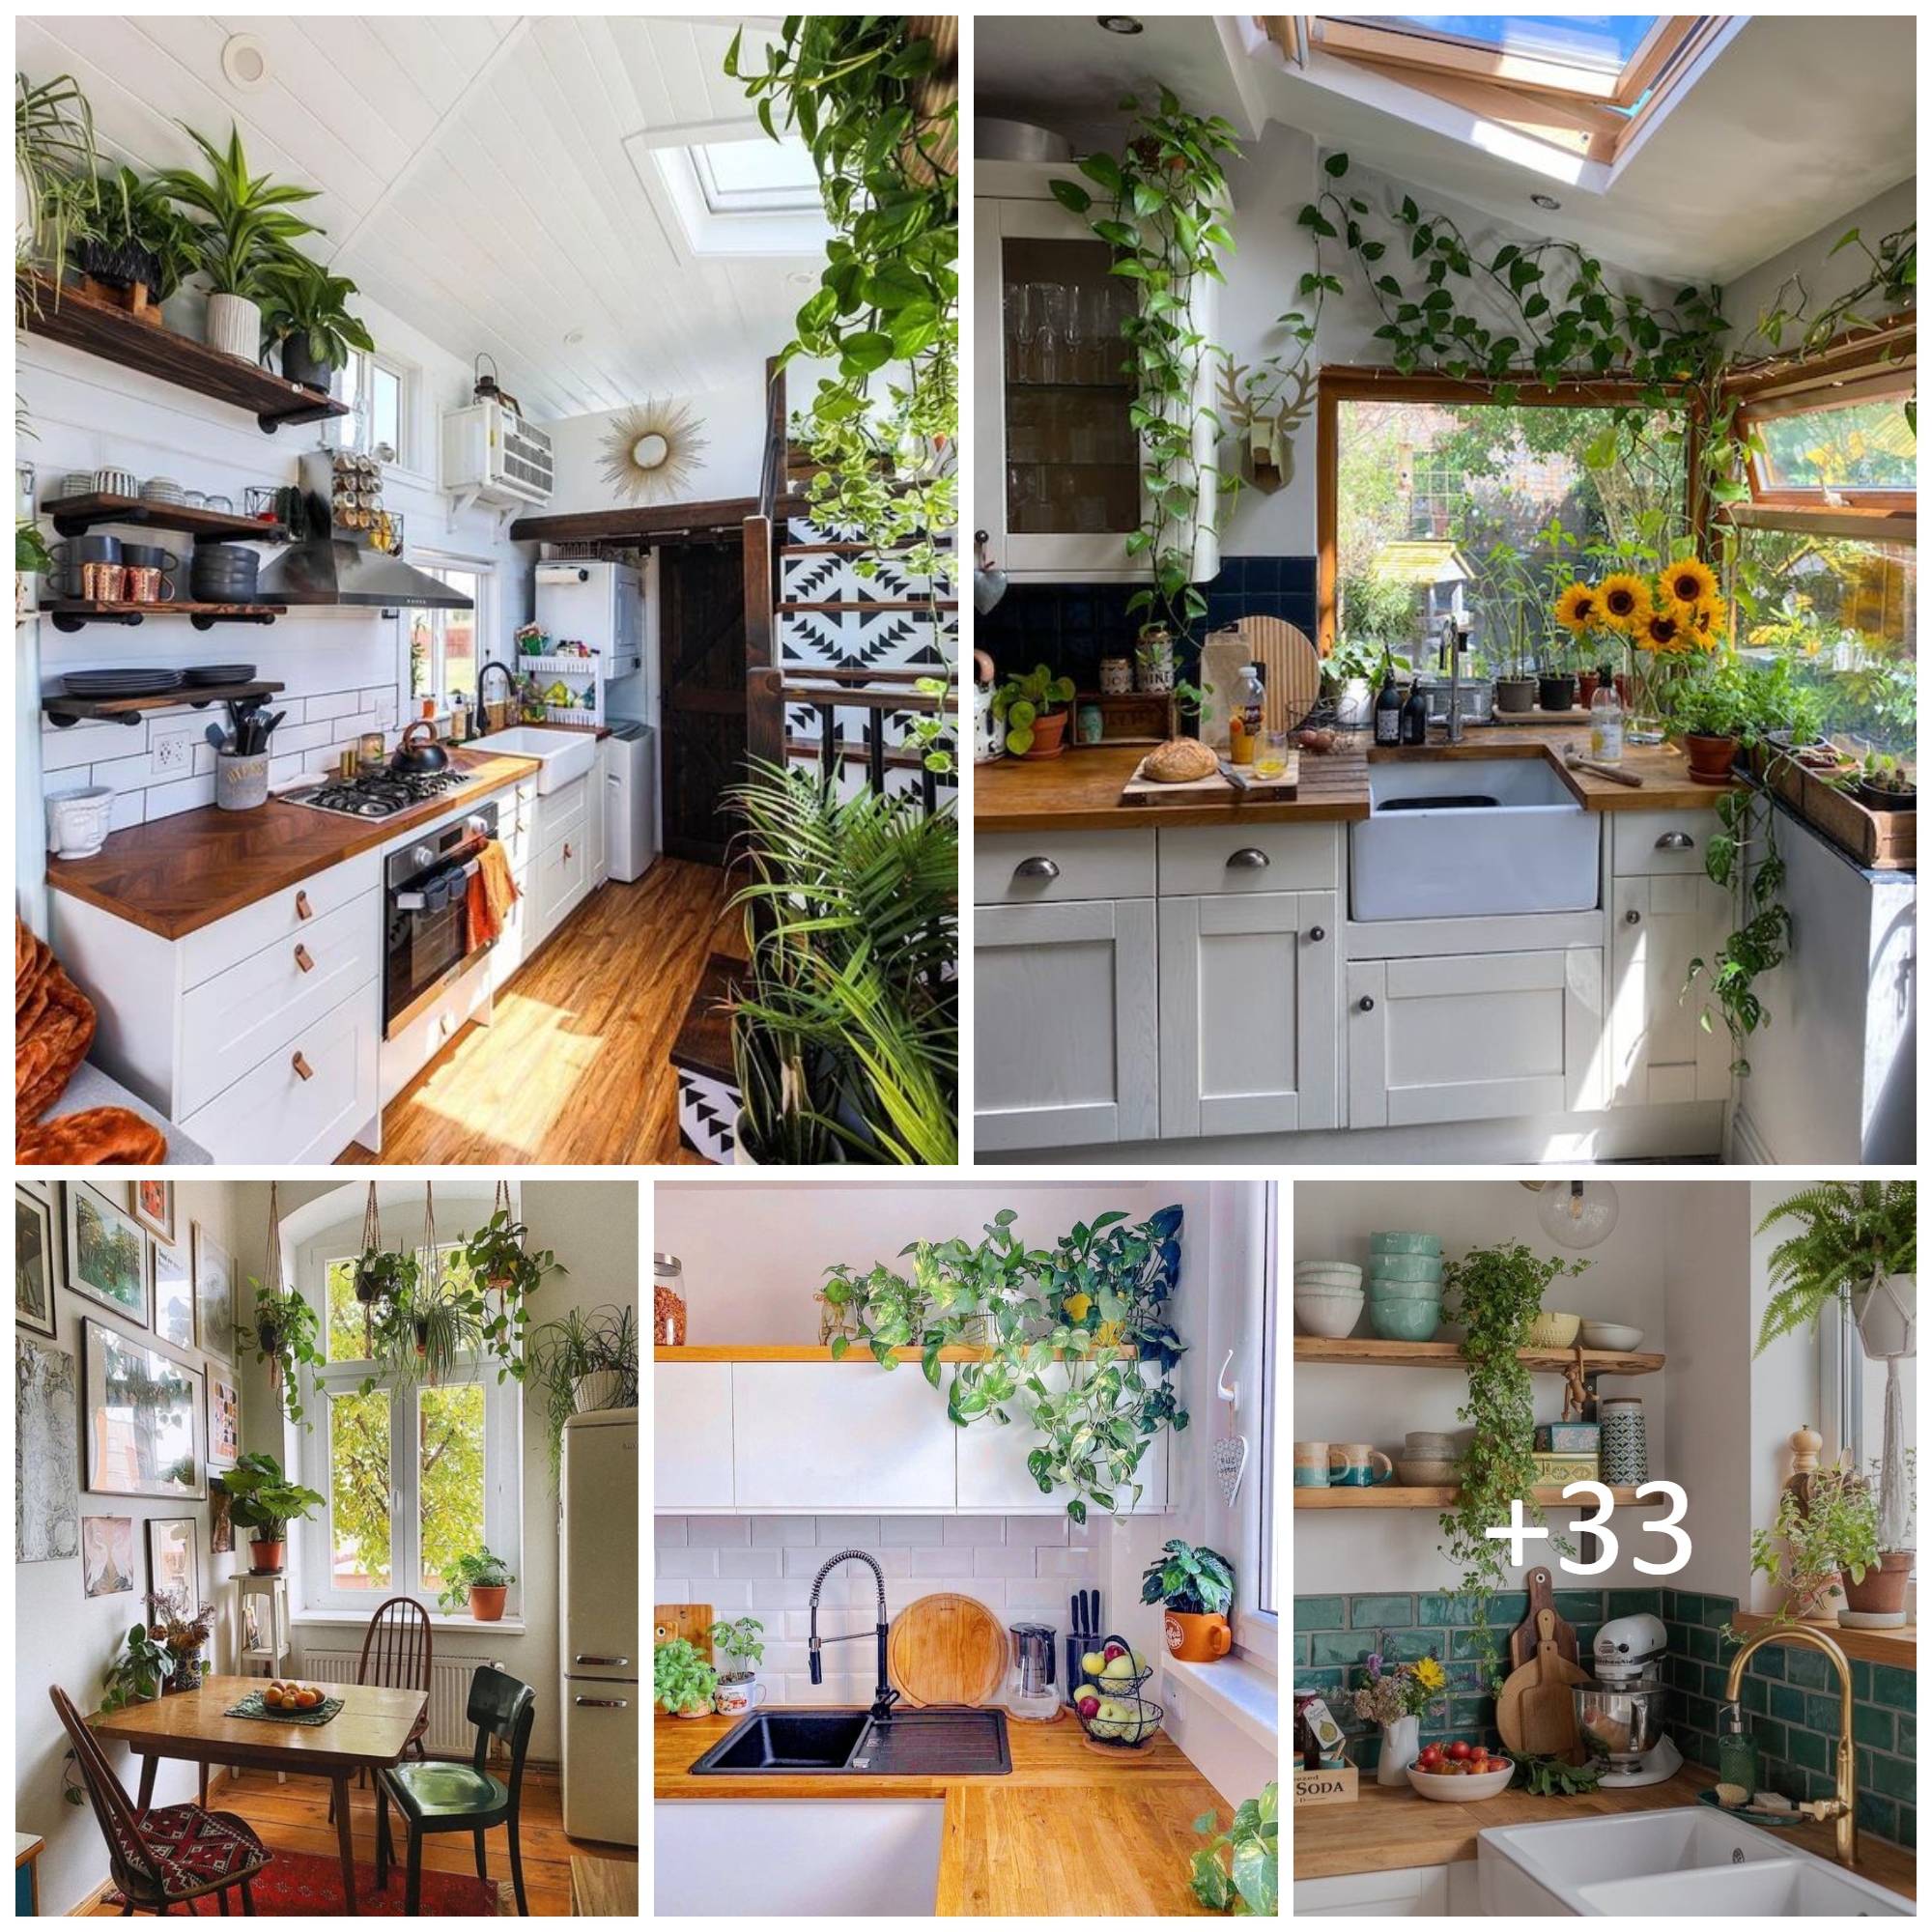 How to Decorate Kitchen with Green Indoor Plants and Save Money